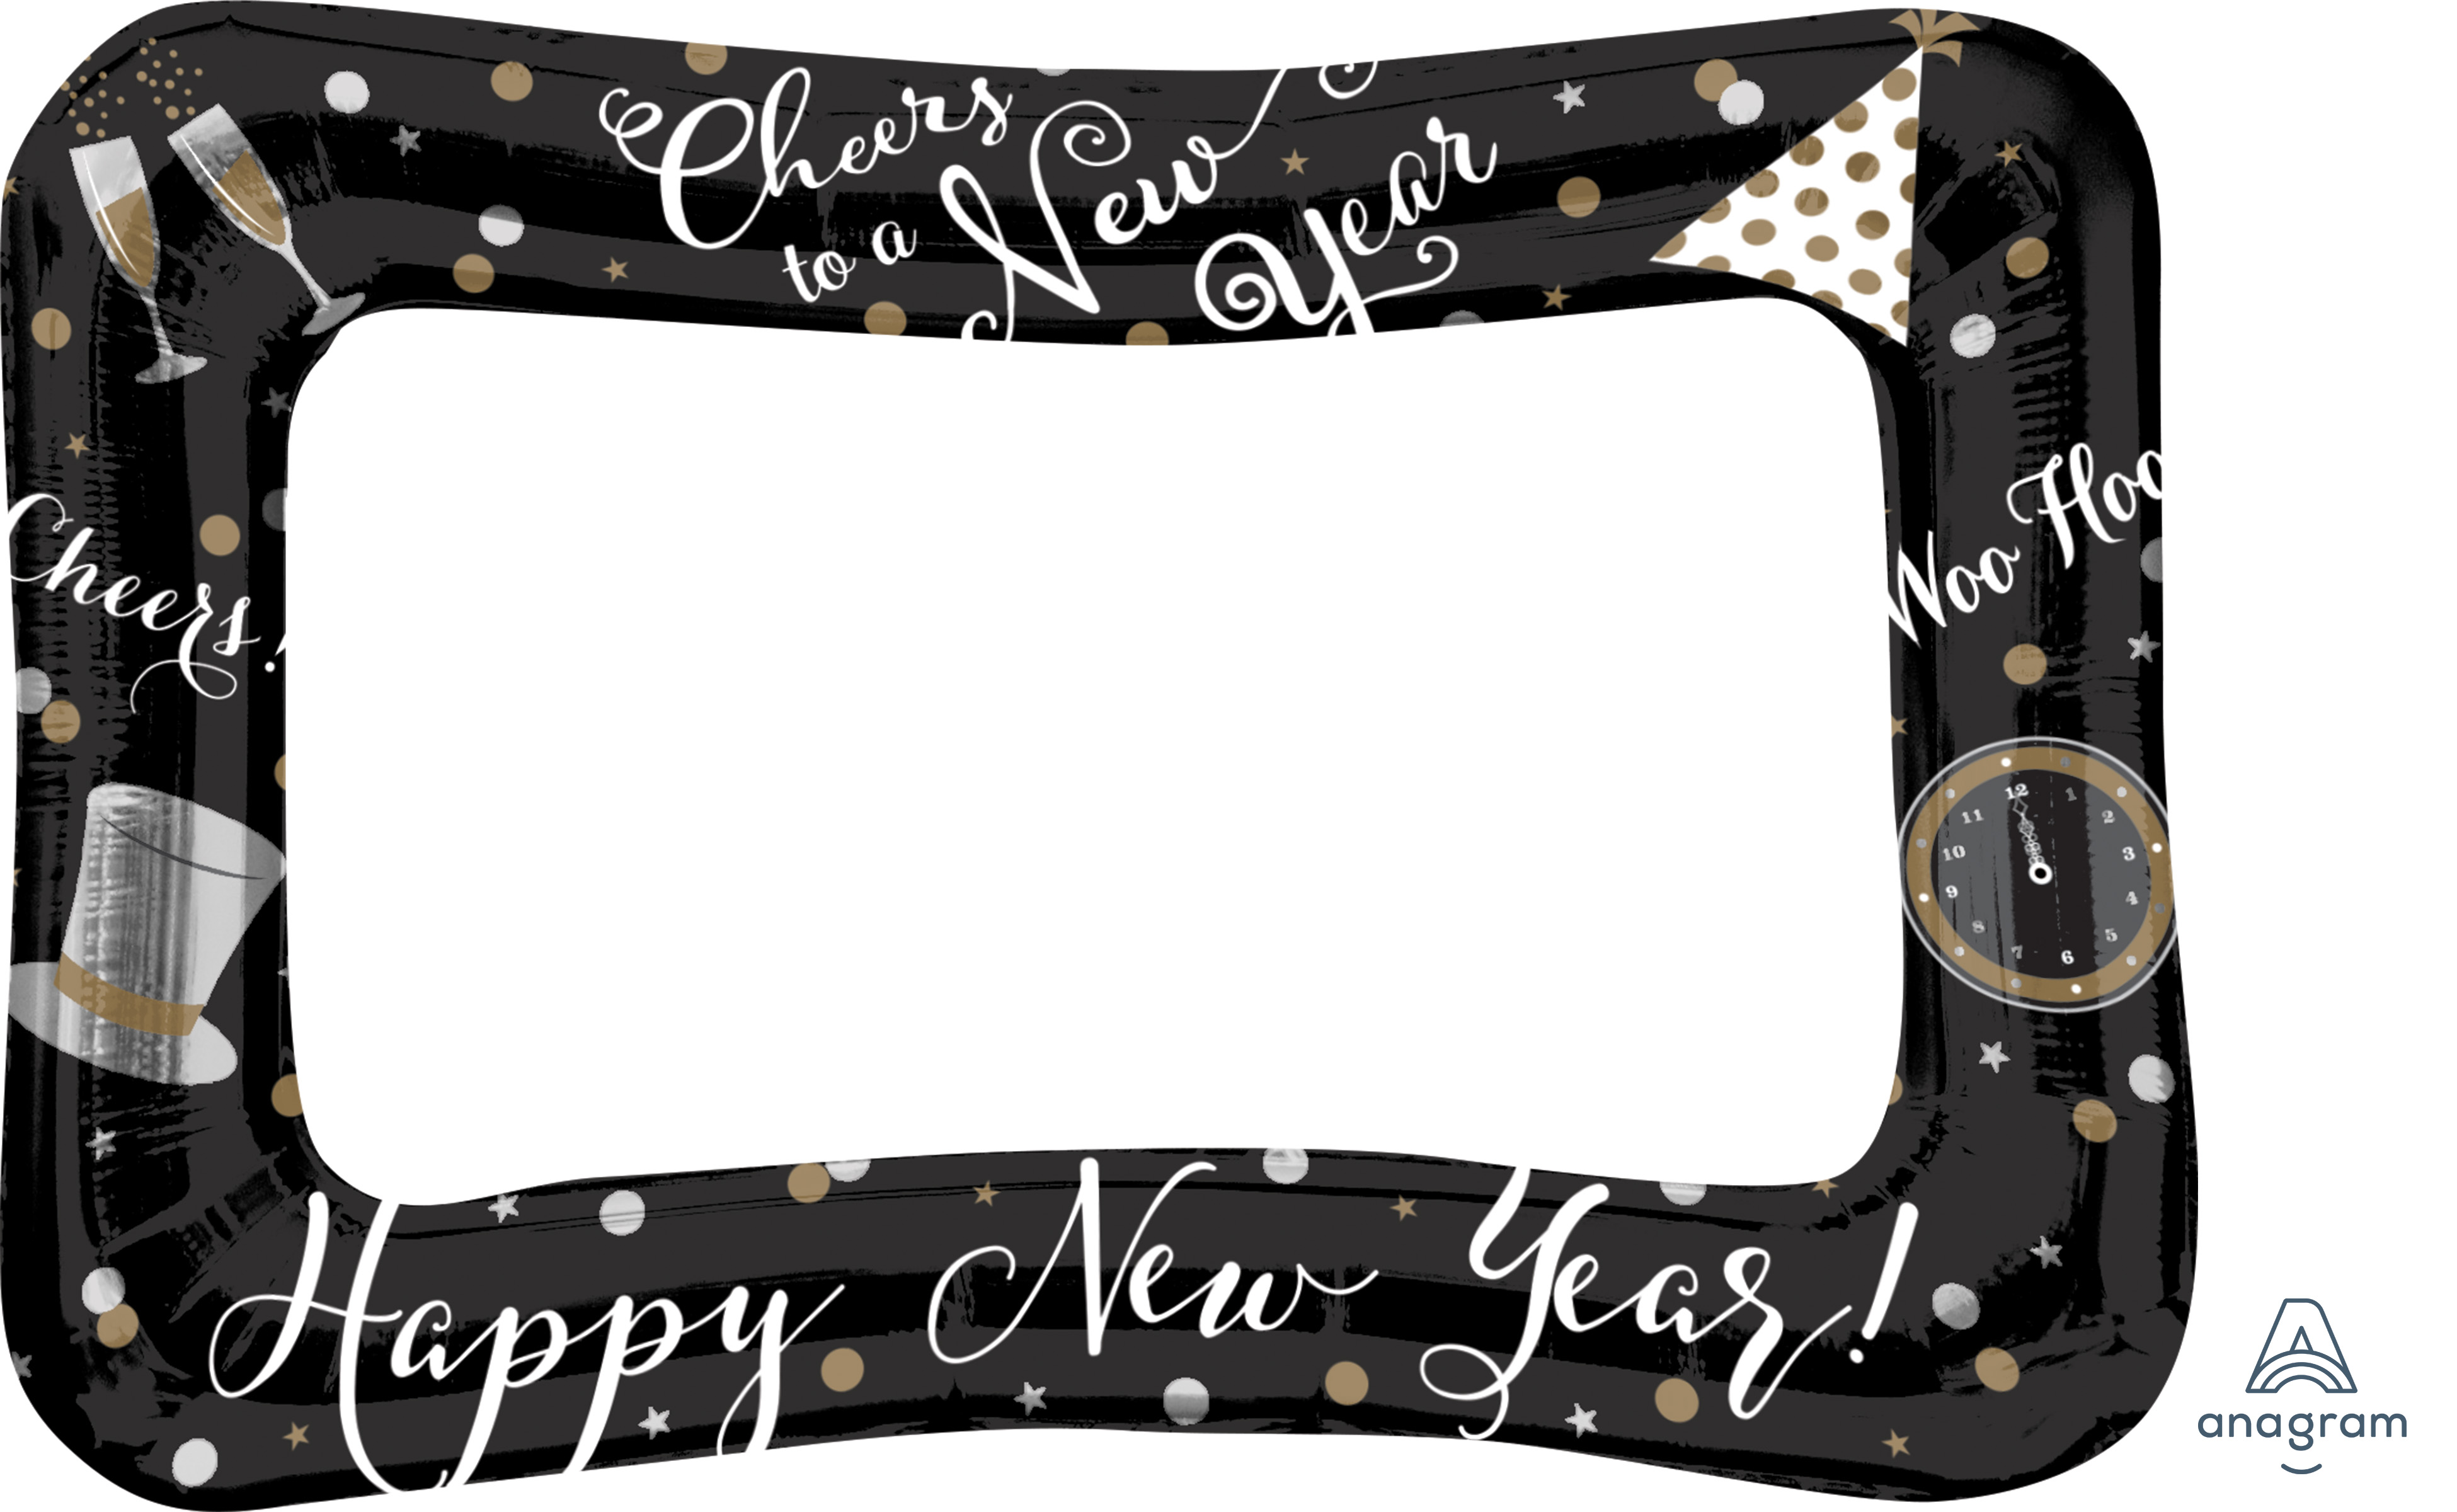 25" Inflatable Frame New Year's Selfie Frame Balloon